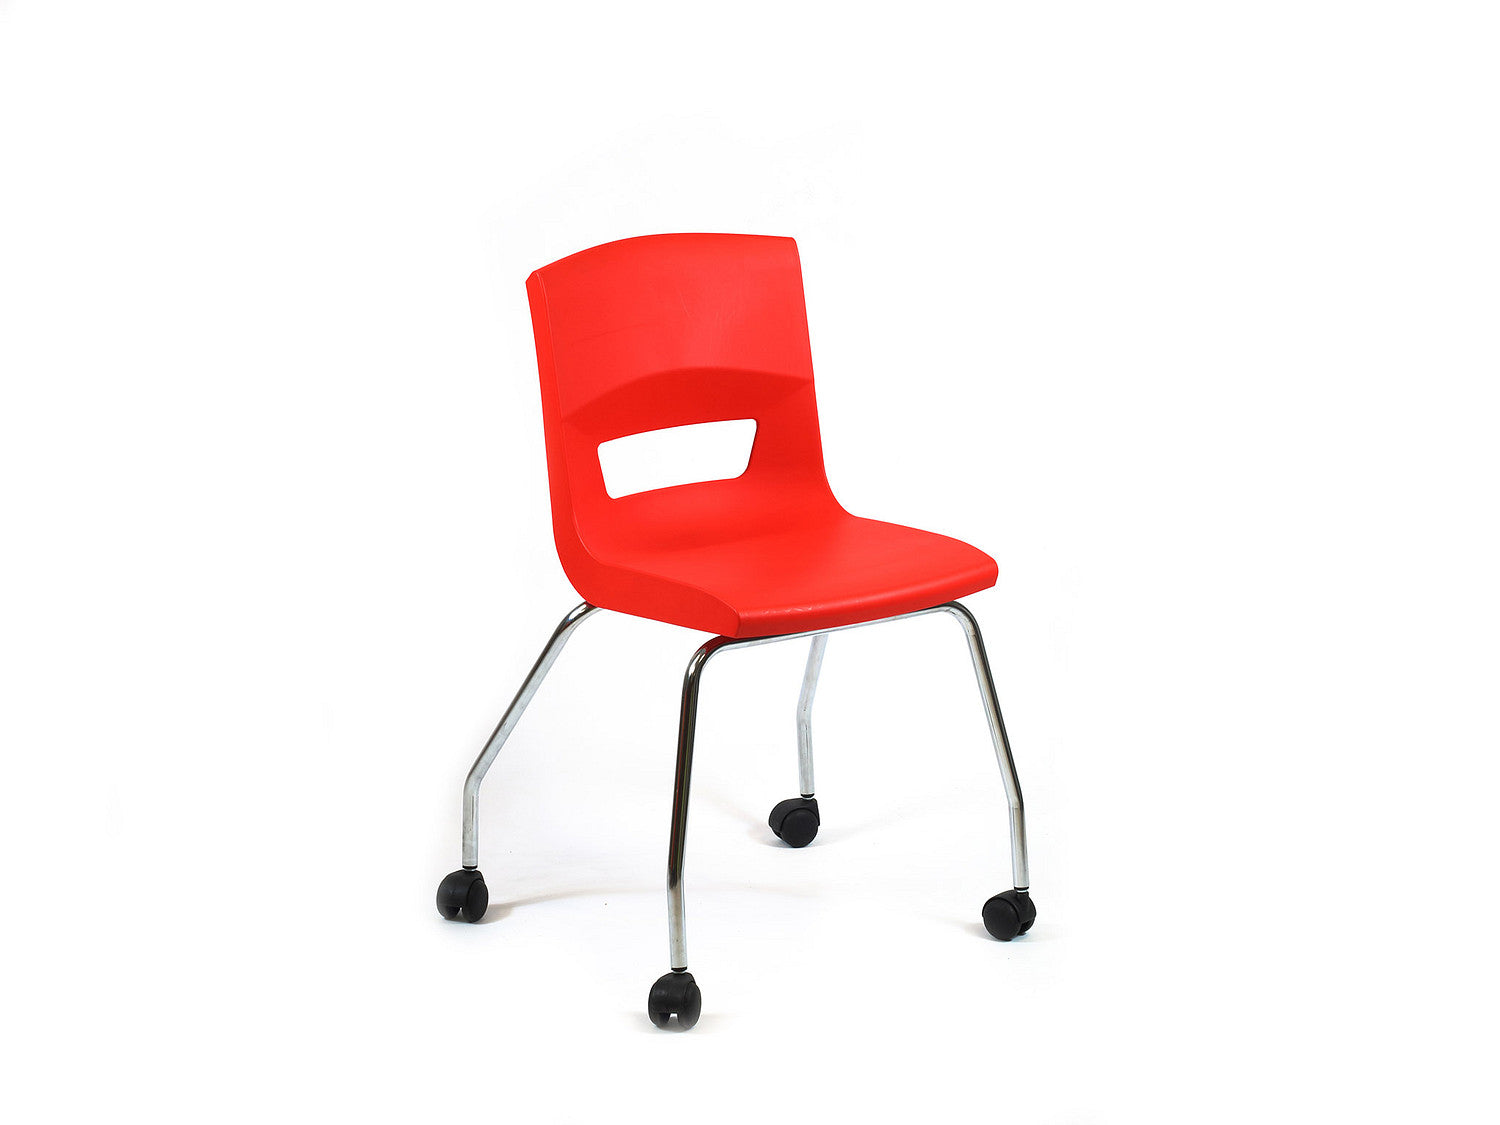 Postura 4 legs on castor unique stlye classroom chair poppy red